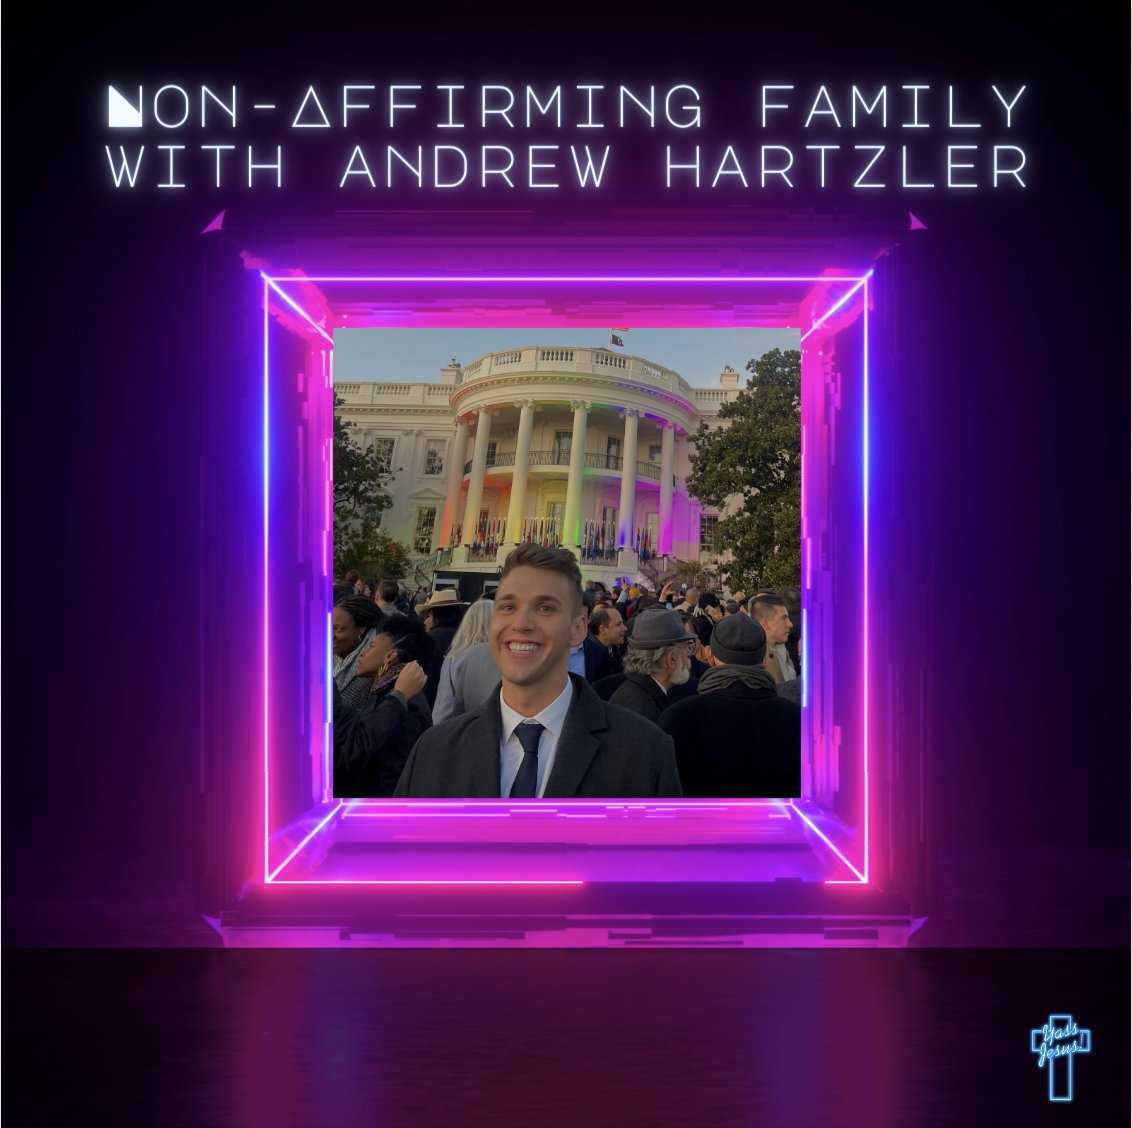 When @andyhartzler posted a TikTok responding to his Aunt Vicki’s crying plea to oppose the #RespectForMarriageAct, he fought misinformation in a direct and loving way.  Andrew joins Yass, Jesus! to talk about responding to non-affirming family members.

open.spotify.com/episode/4POkIm…